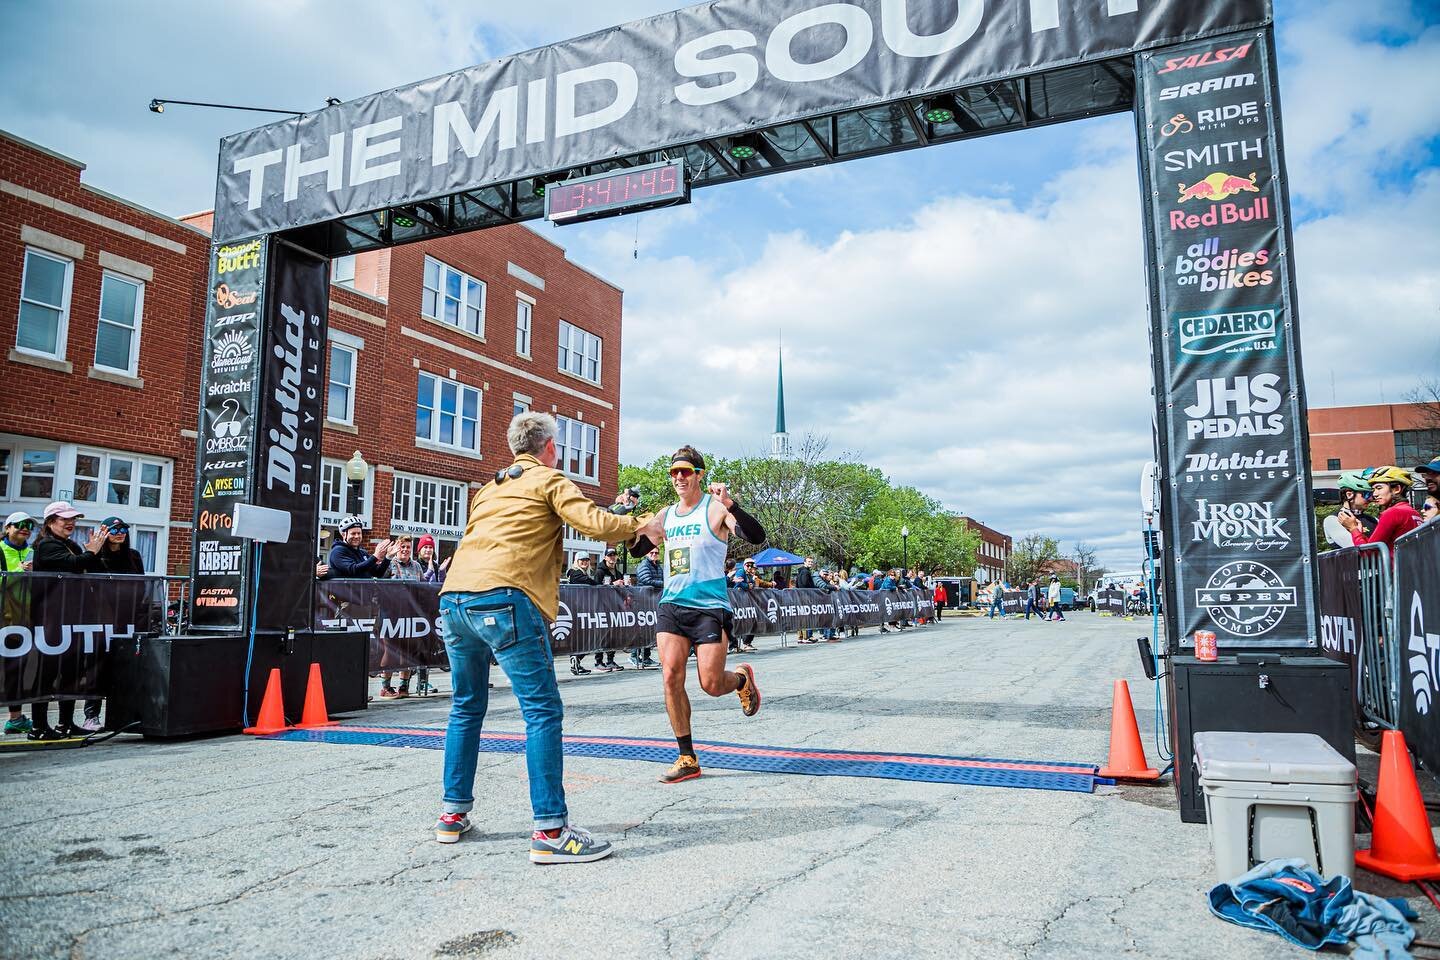 Talk about grit and perseverance. Sean Abeyta displayed that and so much more this past month at the @midsouthgravel 50k in OK. He has been putting in the work and it paid off! He placed 7th with a time of 3:41:45. Way to crush it!! 💪🙌